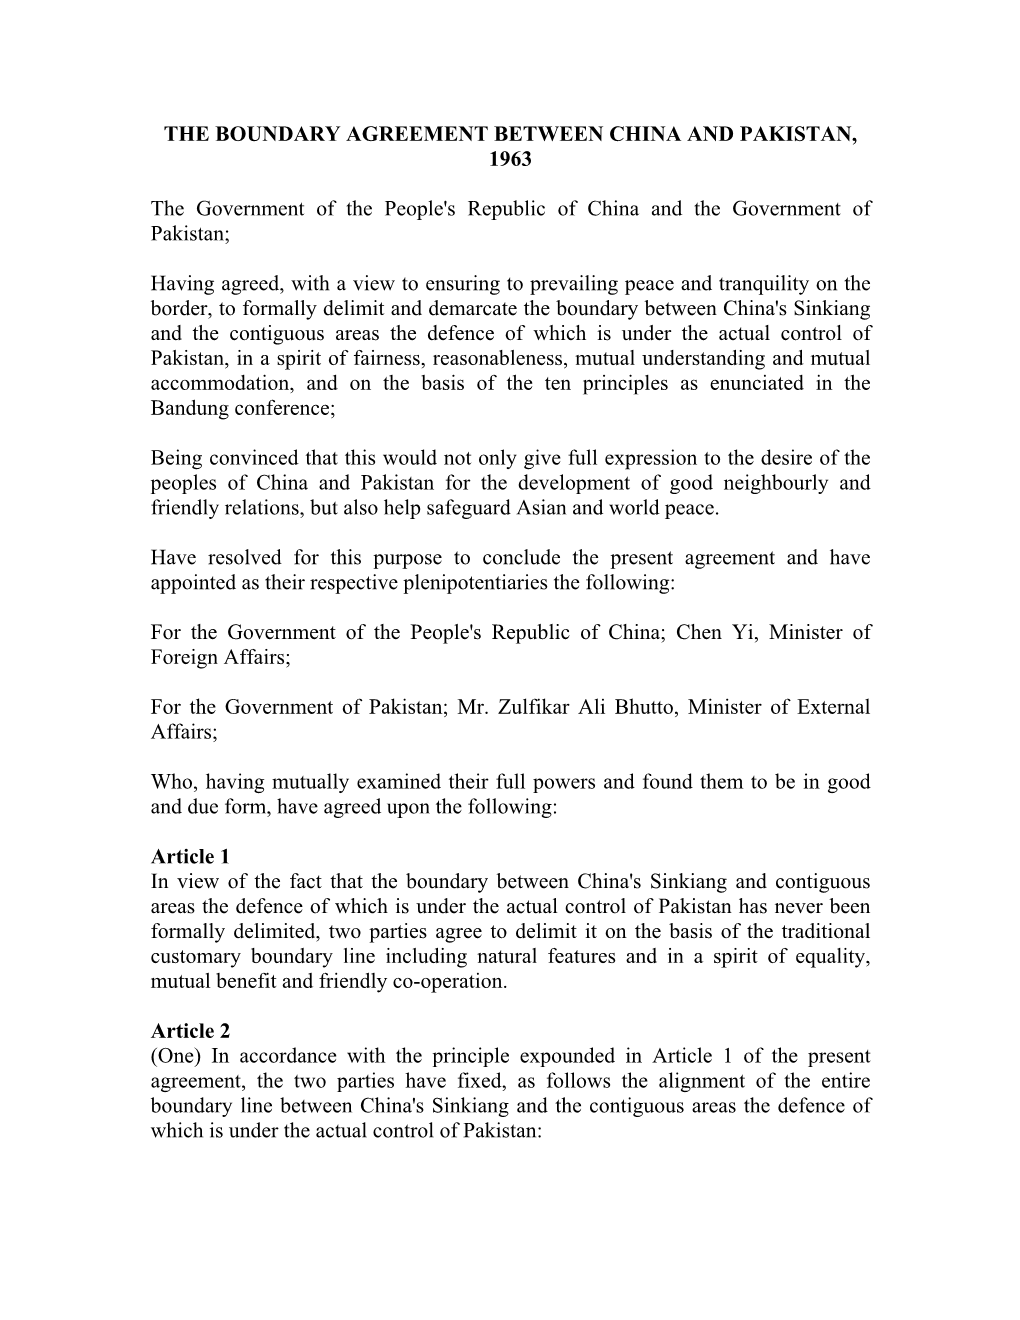 The Boundary Agreement Between China and Pakistan, 1963